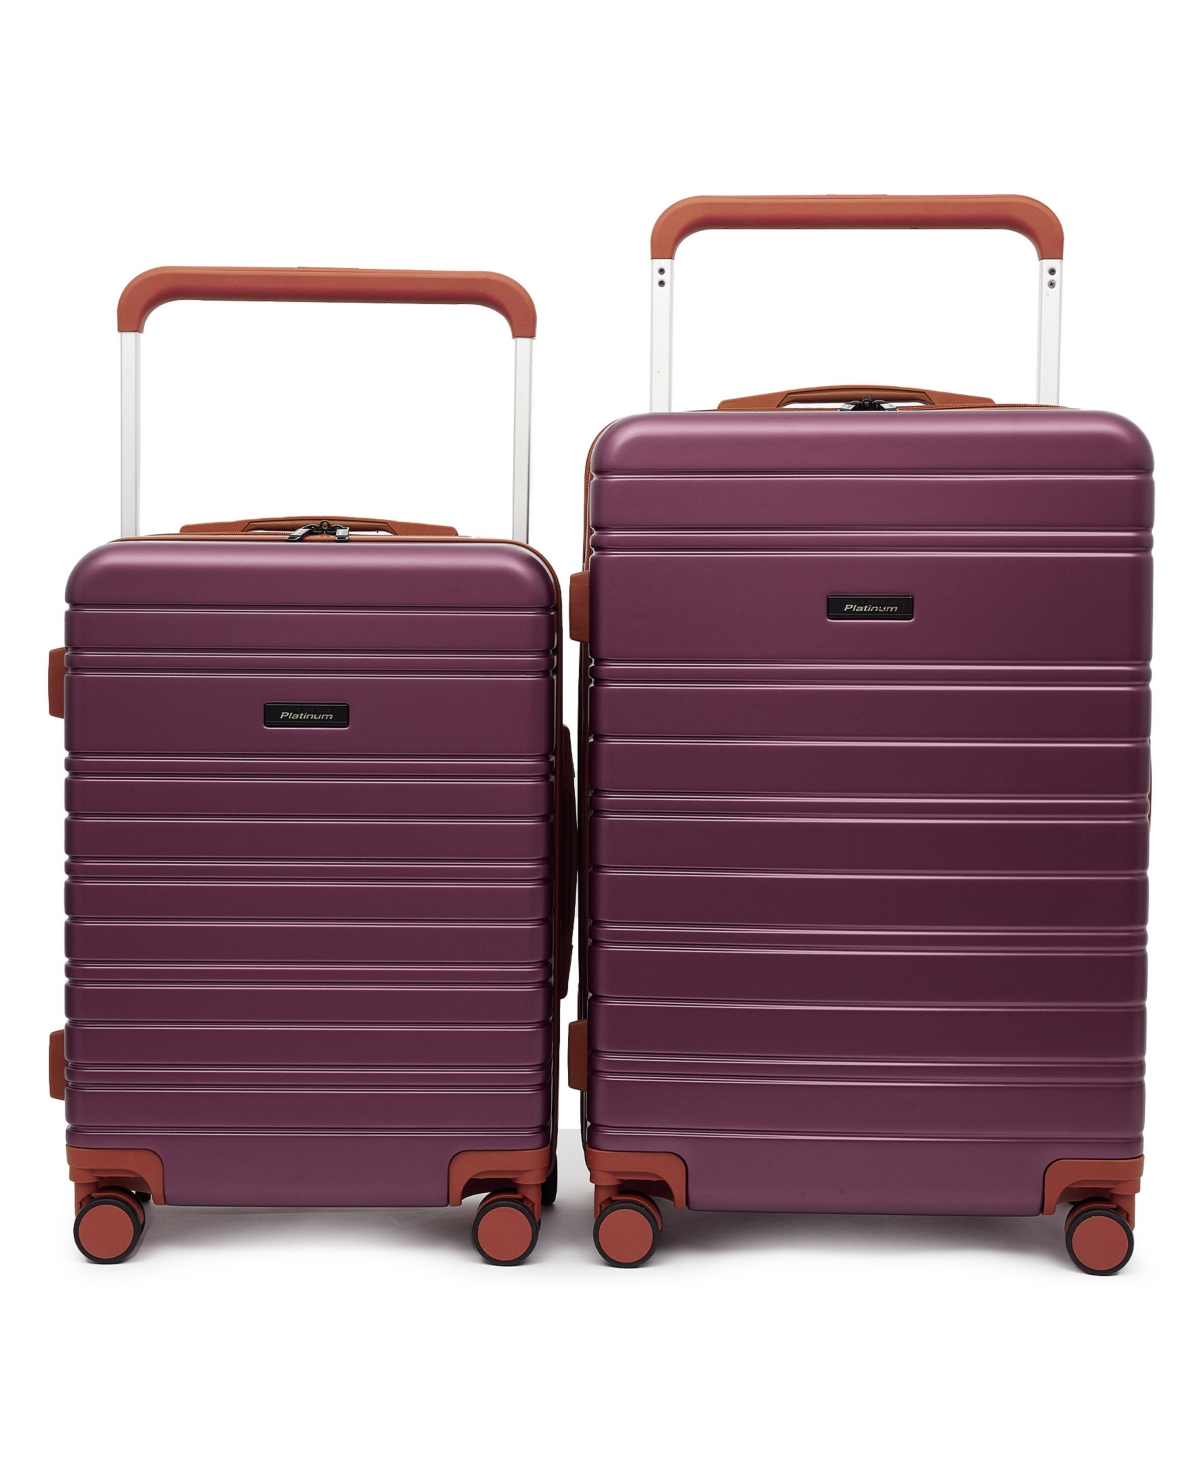 Travelers Club Navigate Collection 2 Piece Rolling Hard Case Luggage Set With X-tra Wide Telescopic Handle In Burgundy